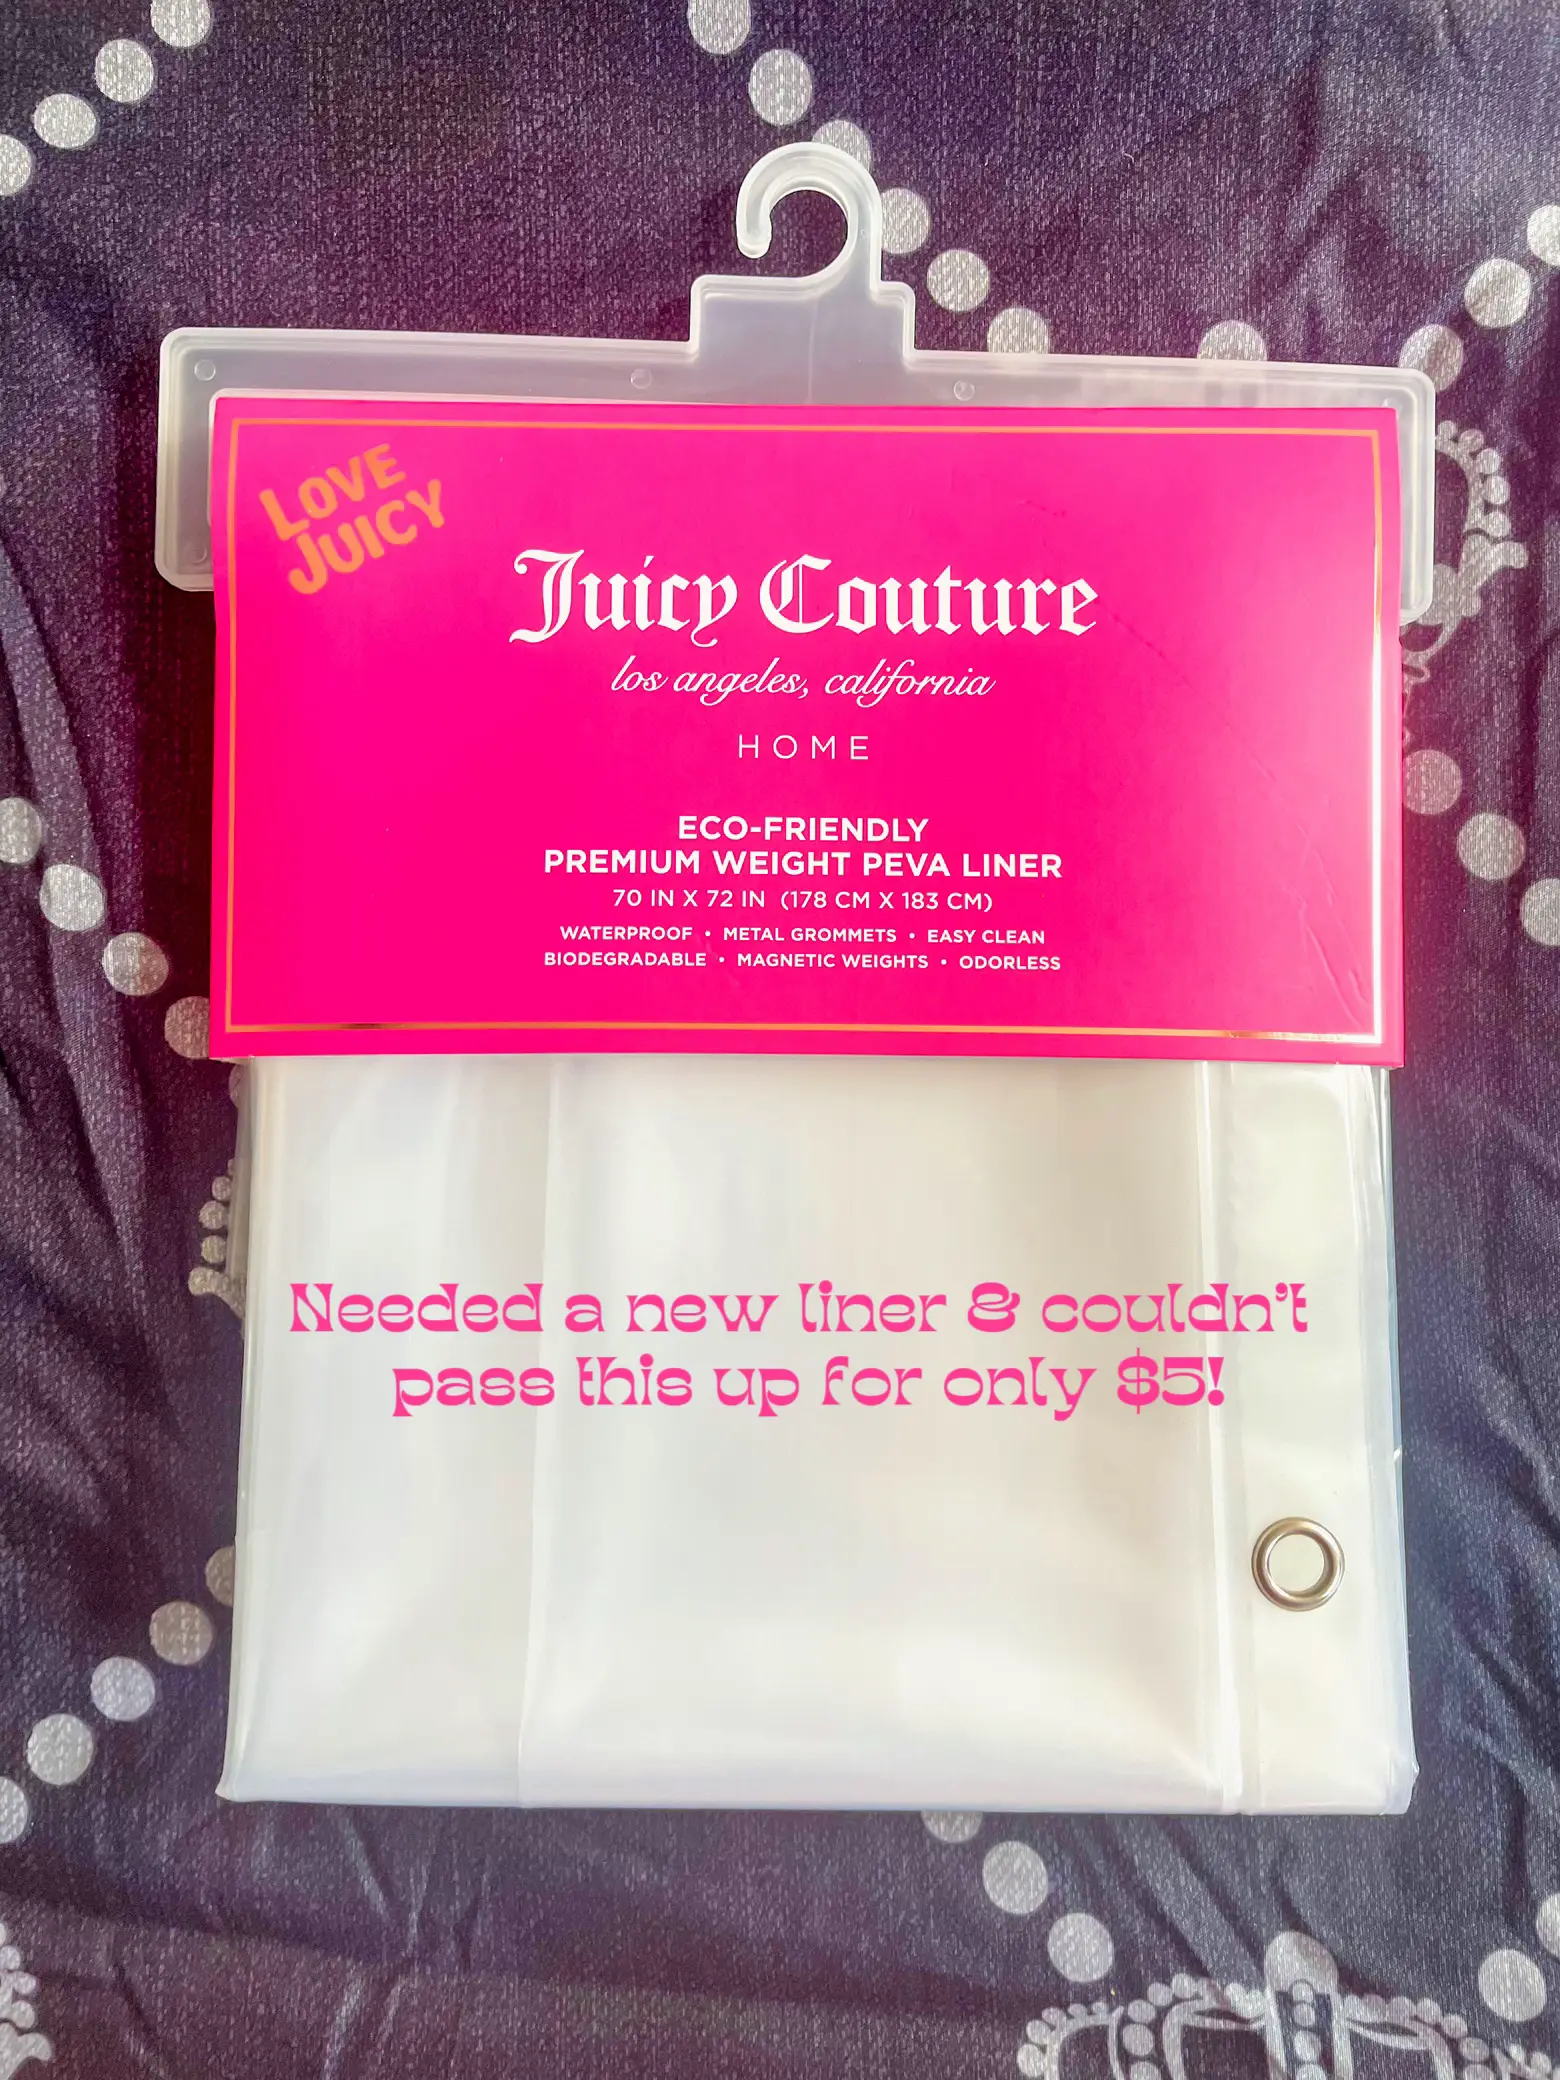 SHOP WITH ME AT ROSS FOR JUICY COUTURE HOME DECOR!